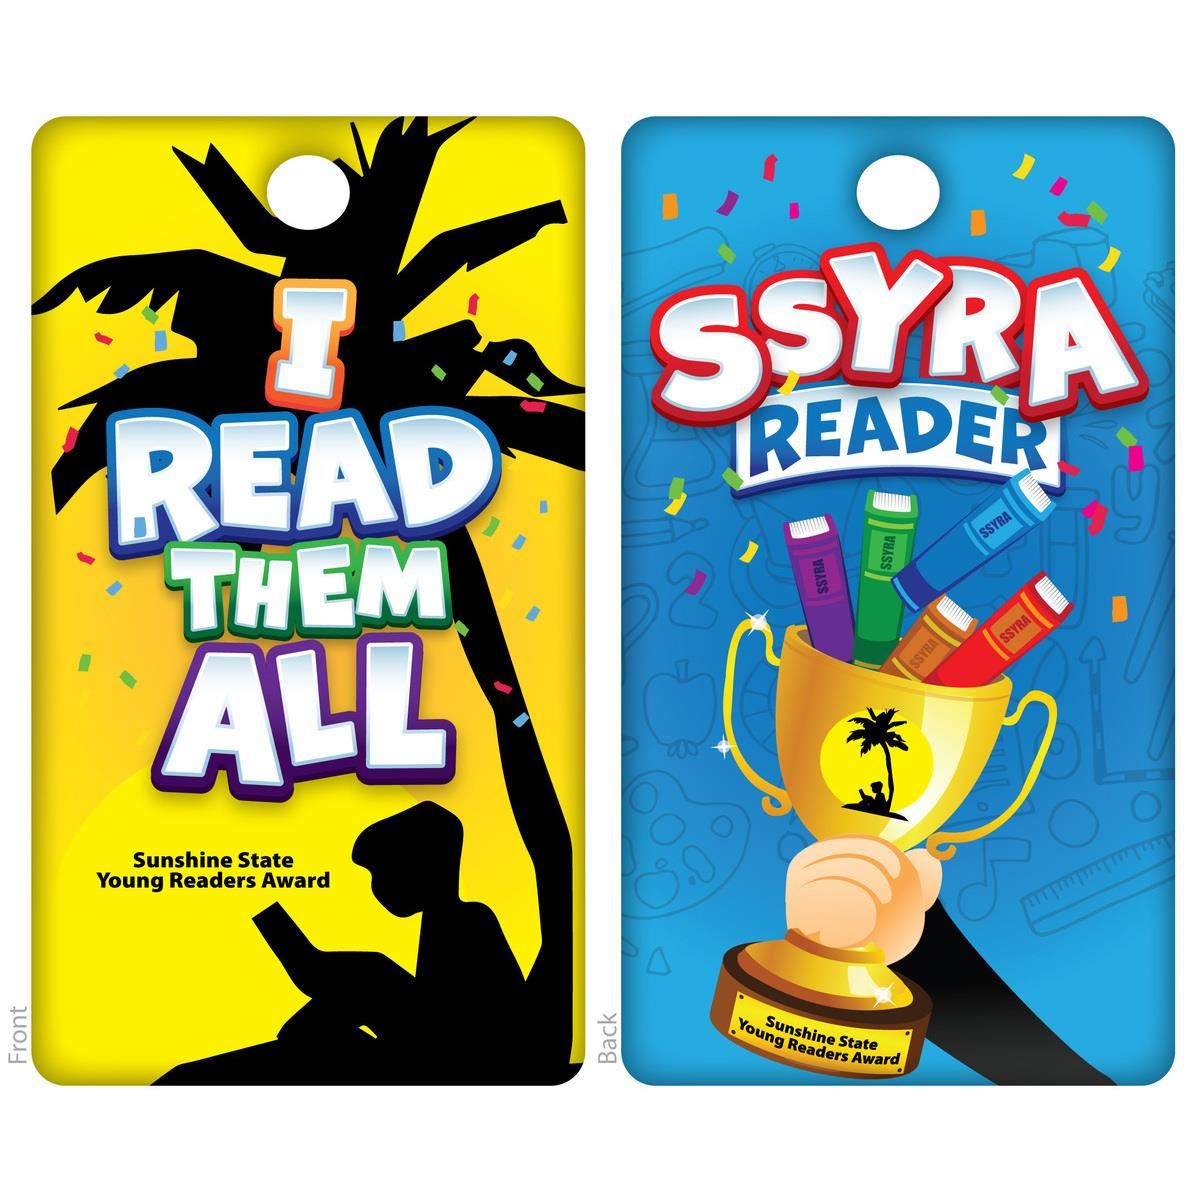 I Read Them All brag tag for SSYRA book readers